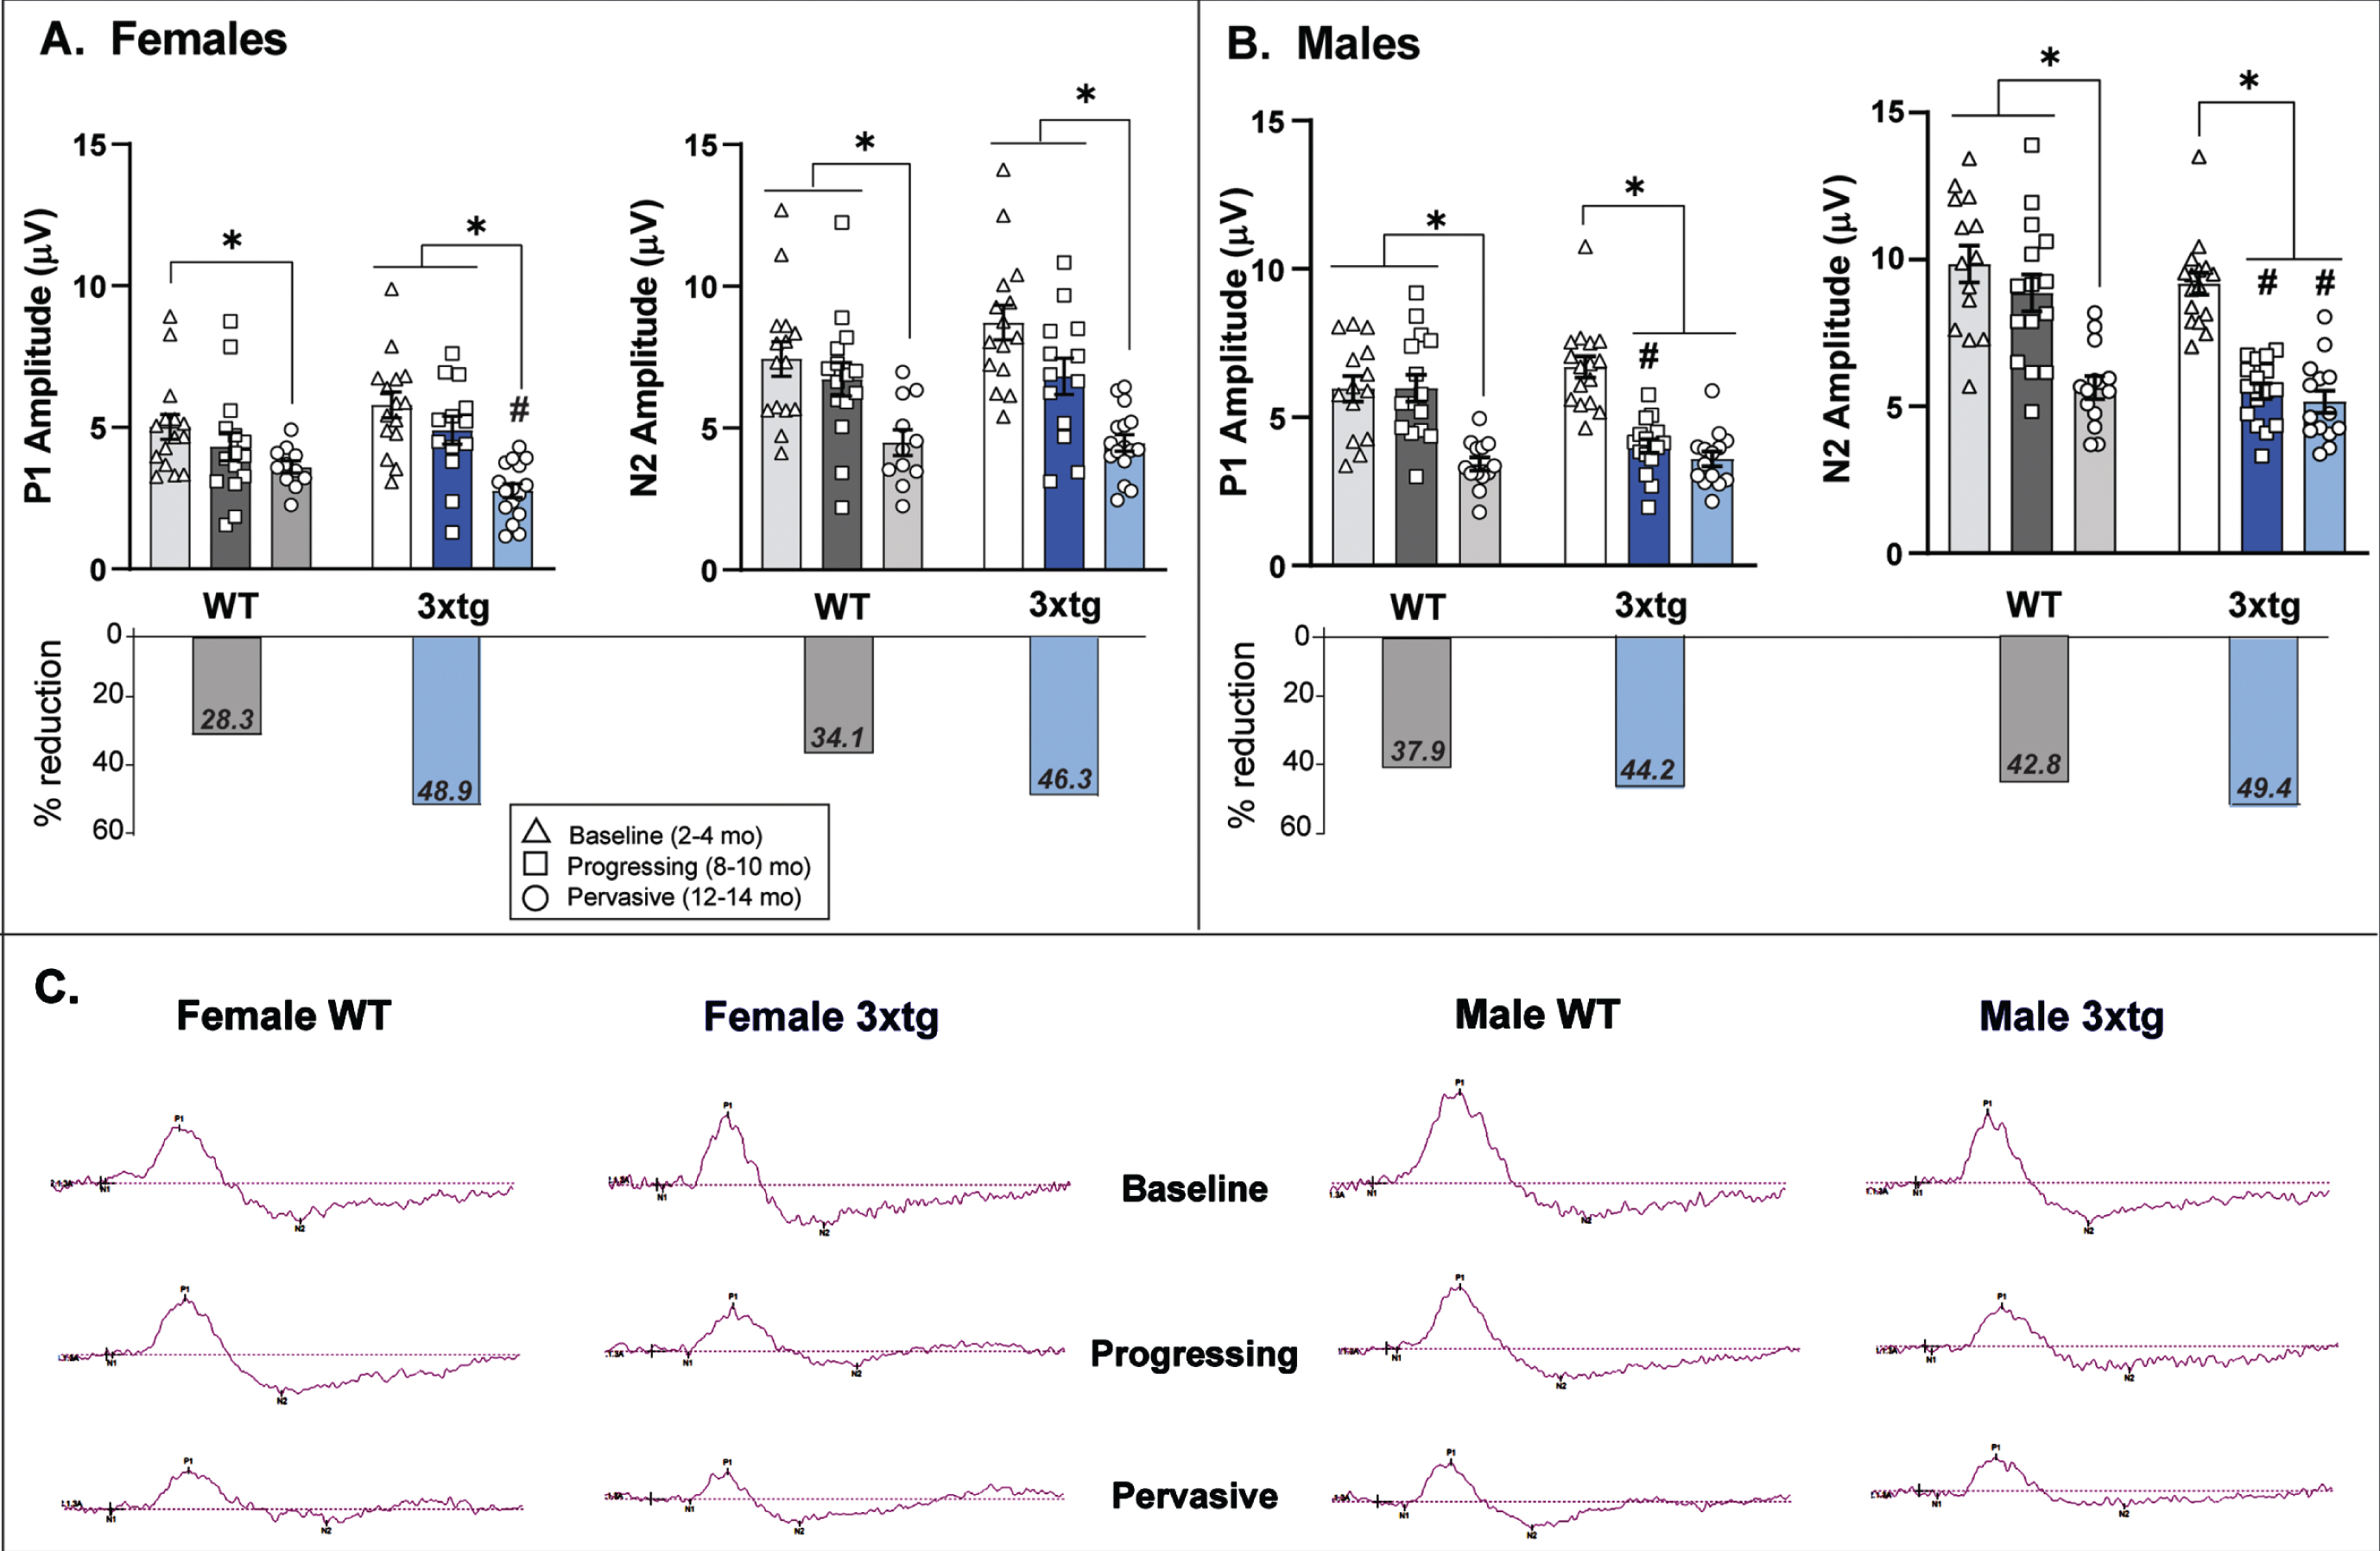 Pattern electroretinogram (PERG) response across increasing disease stage/age in 3xTg and wildtype (WT) control mice. Mean (bar) and individual (symbol) amplitudes for P1 and N2 peaks in the PERG waveform are depicted for female (A) and male (B) 3xTg and WT mice. The overall percent reduction in waveform amplitude across the entire tested age-span of mice is summarized for each sex and genotype in the lower set of bar graphs. A) P1 amplitude in female mice significantly decreases with age in both genotypes; however, the magnitude of this (% reduction) is much greater in 3xTg mice. N2 amplitude also decreased with age in both female 3xTg and WT mice—also to a greater extent in 3xTg mice. B) Both P1 and N2 amplitude were significantly reduced in male 3xTg mice in the 8-10-month age group—this reduction in PERG response occurred much earlier than normal age-related decrements in male WT mice. While these amplitude reductions occurred earlier in male 3xTg mice, the overall magnitude of these response decrements were roughly comparable between the two genotypes. *indicates significant age differences within genotype (p < 0.05); #indicates significant differences between age-matched 3xTg and WT mice (p < 0.05). Error bars represent s.e.m. Note: N2 amplitude data are negative values but were plotted as absolute values for ease of visual comparison. Data are from 108 total mice (n = 7–9 mice per sex/genotype/age group x 1-2 retina tested per mouse. C) Representative traces of the entire PERG waveform (amplitude x time) are plotted for 3xTg and WT mice by age and sex.